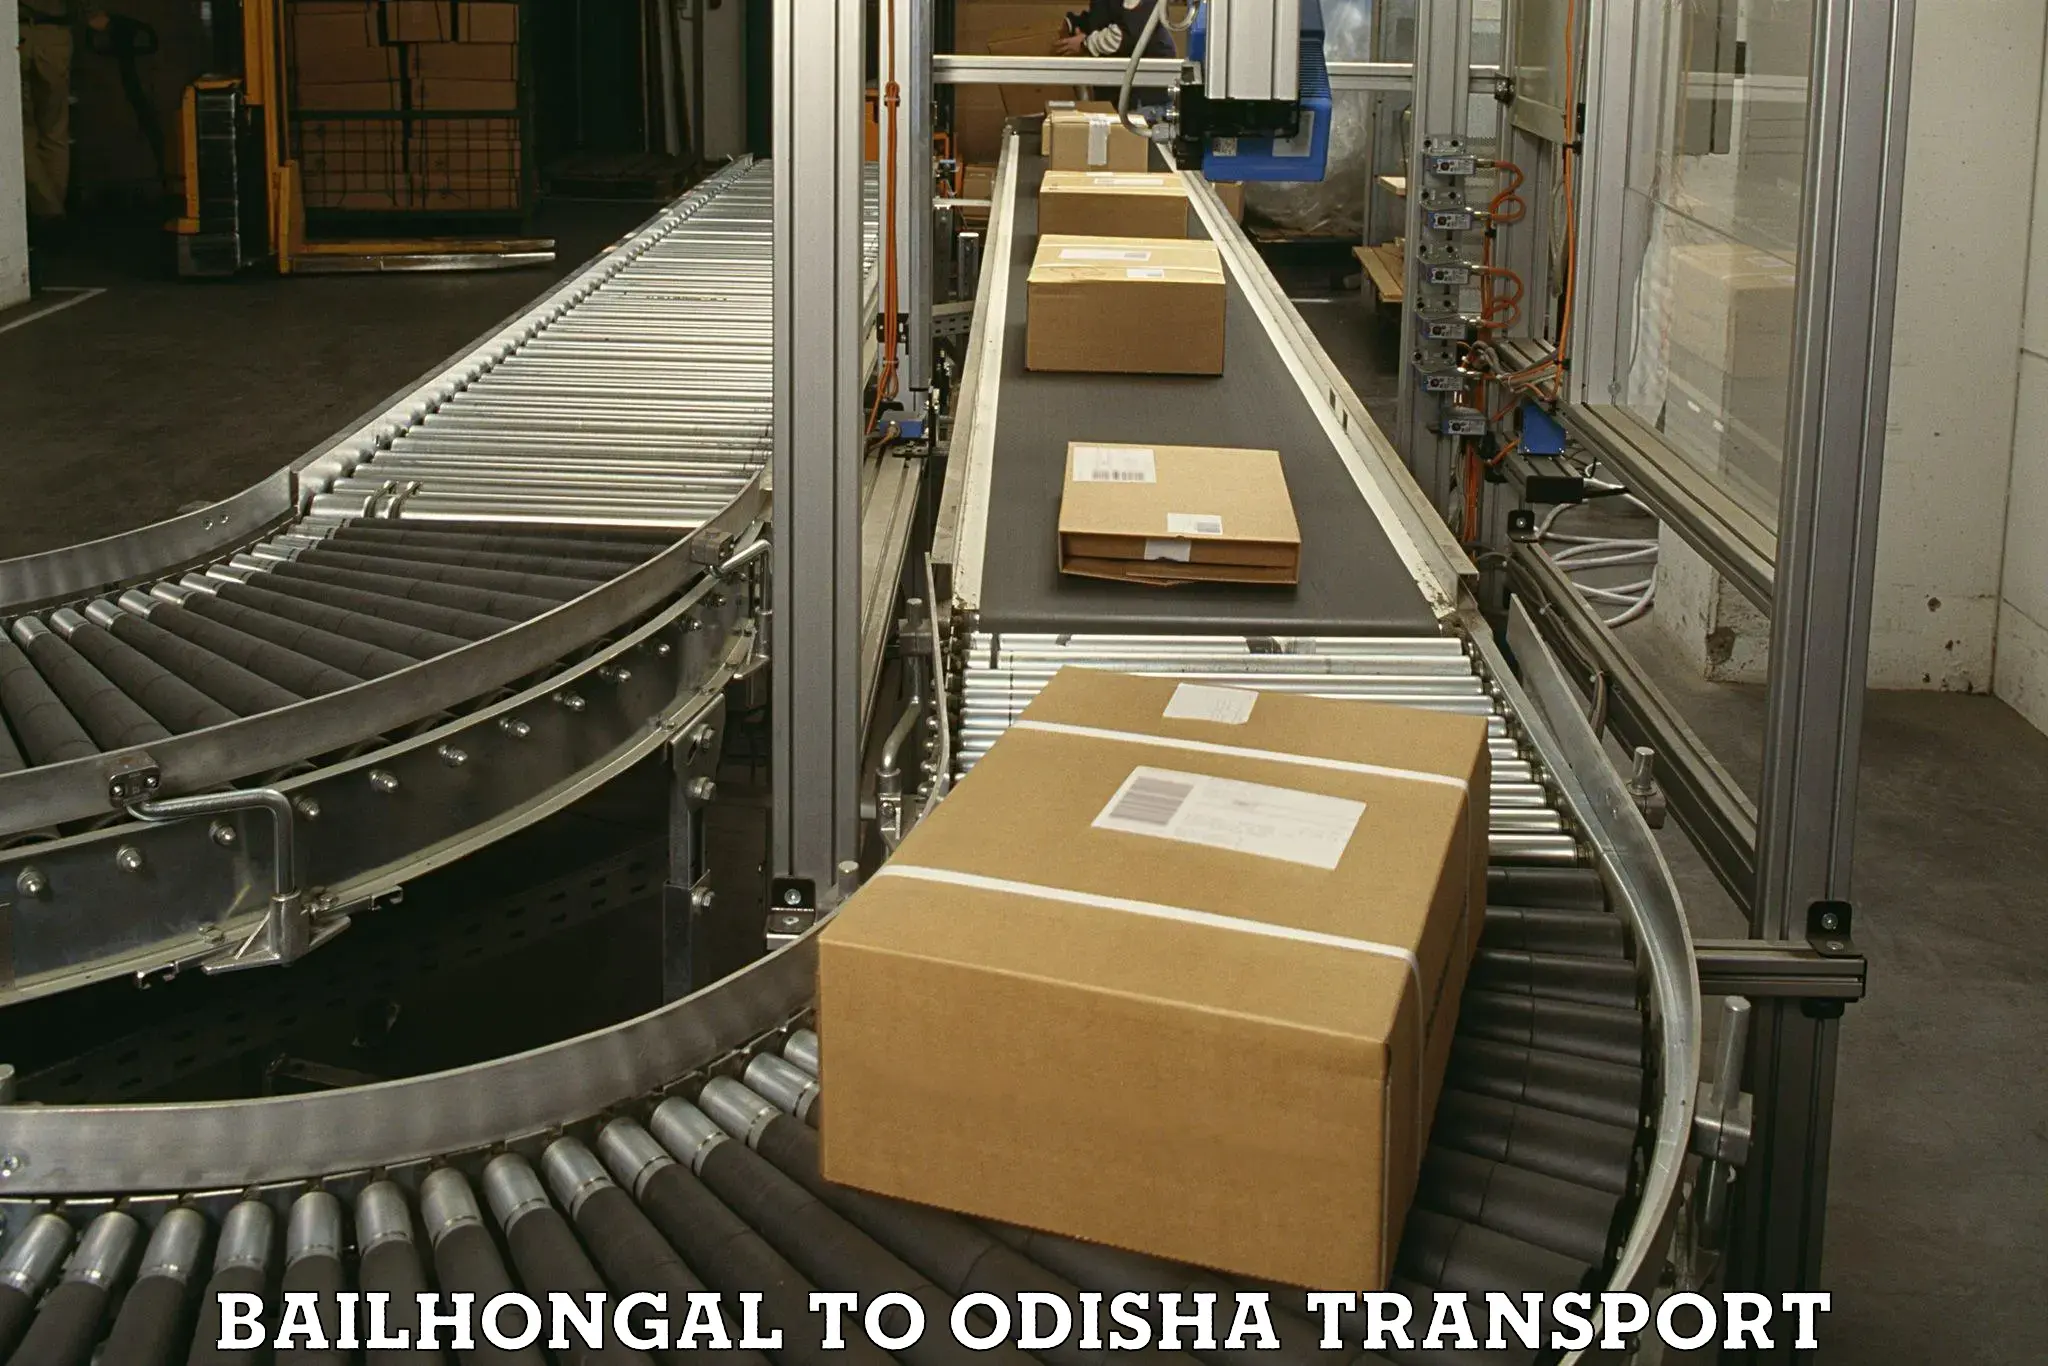 Truck transport companies in India Bailhongal to Chandipur